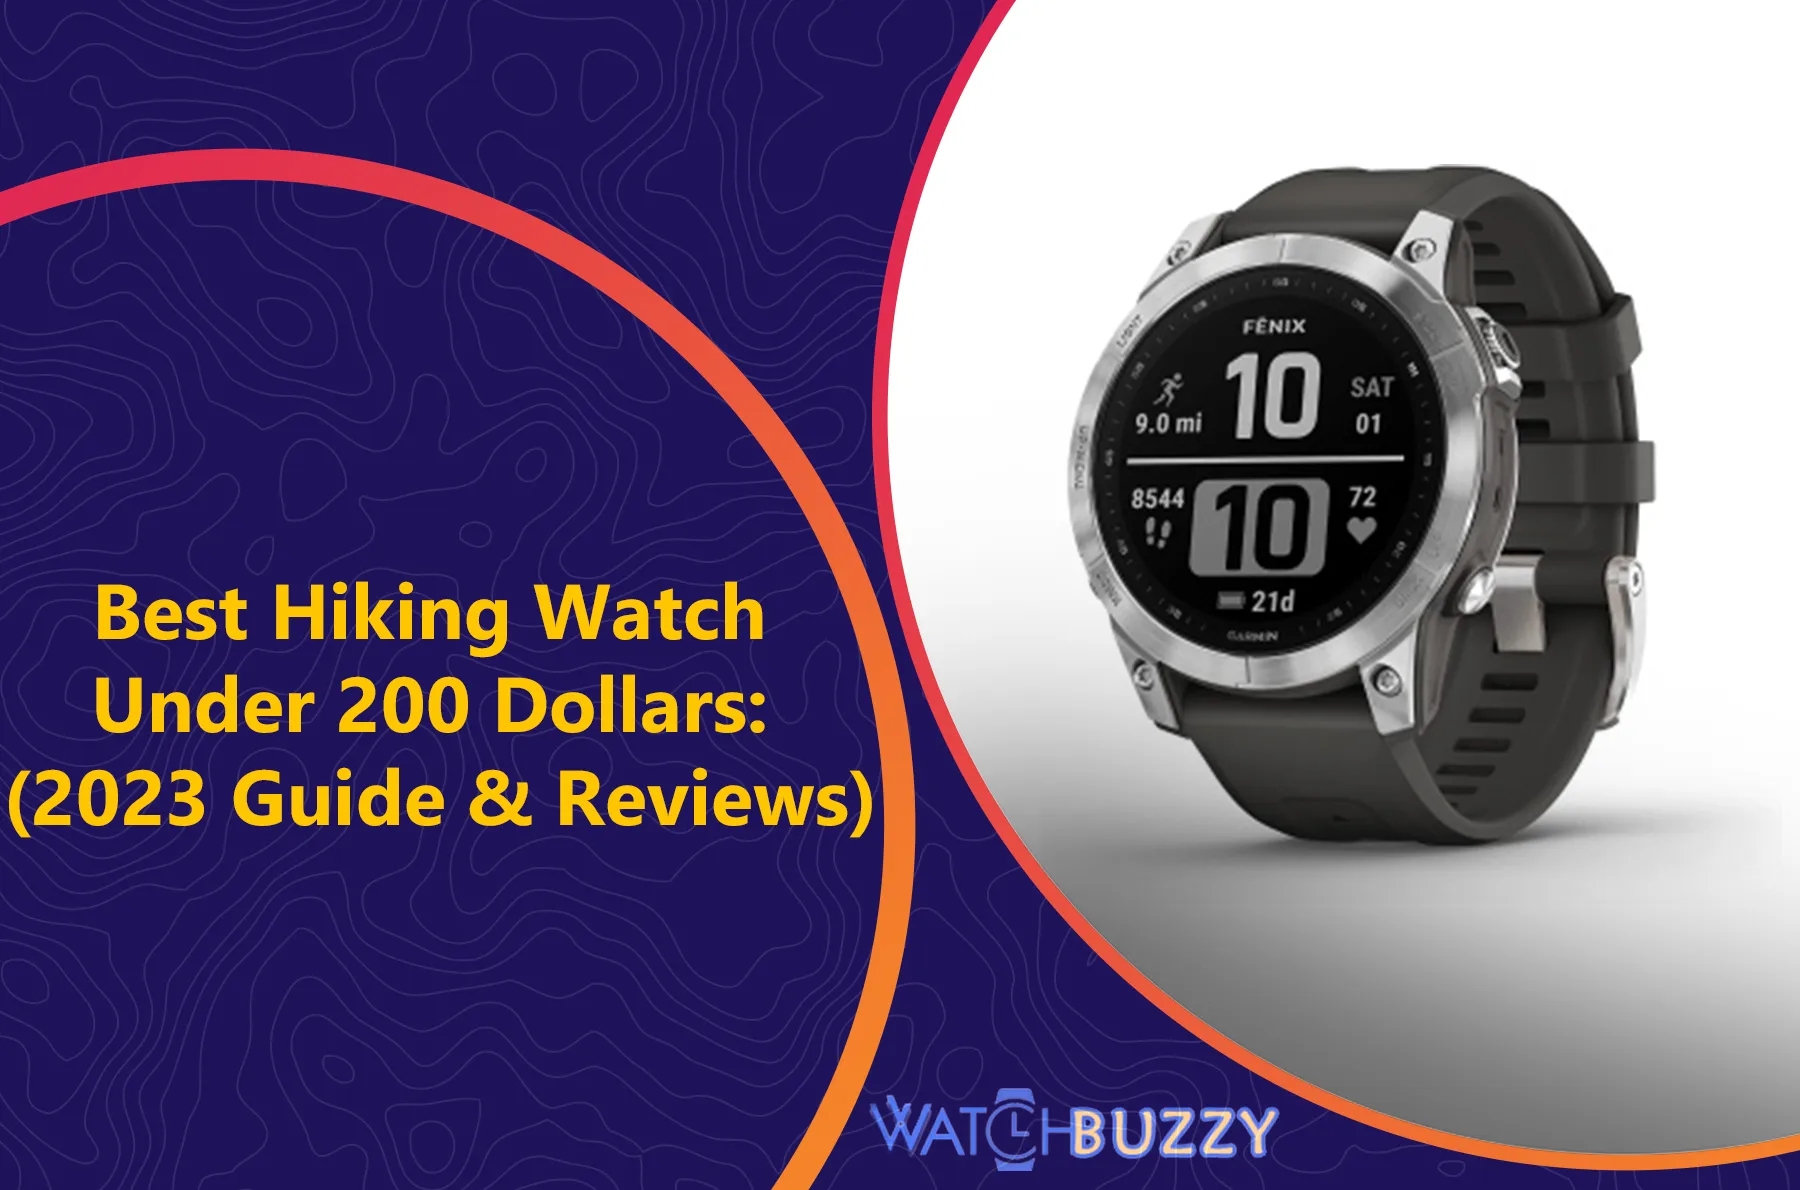 Best Hiking Watch Under 200 Dollars: (2023 Guide & Reviews)